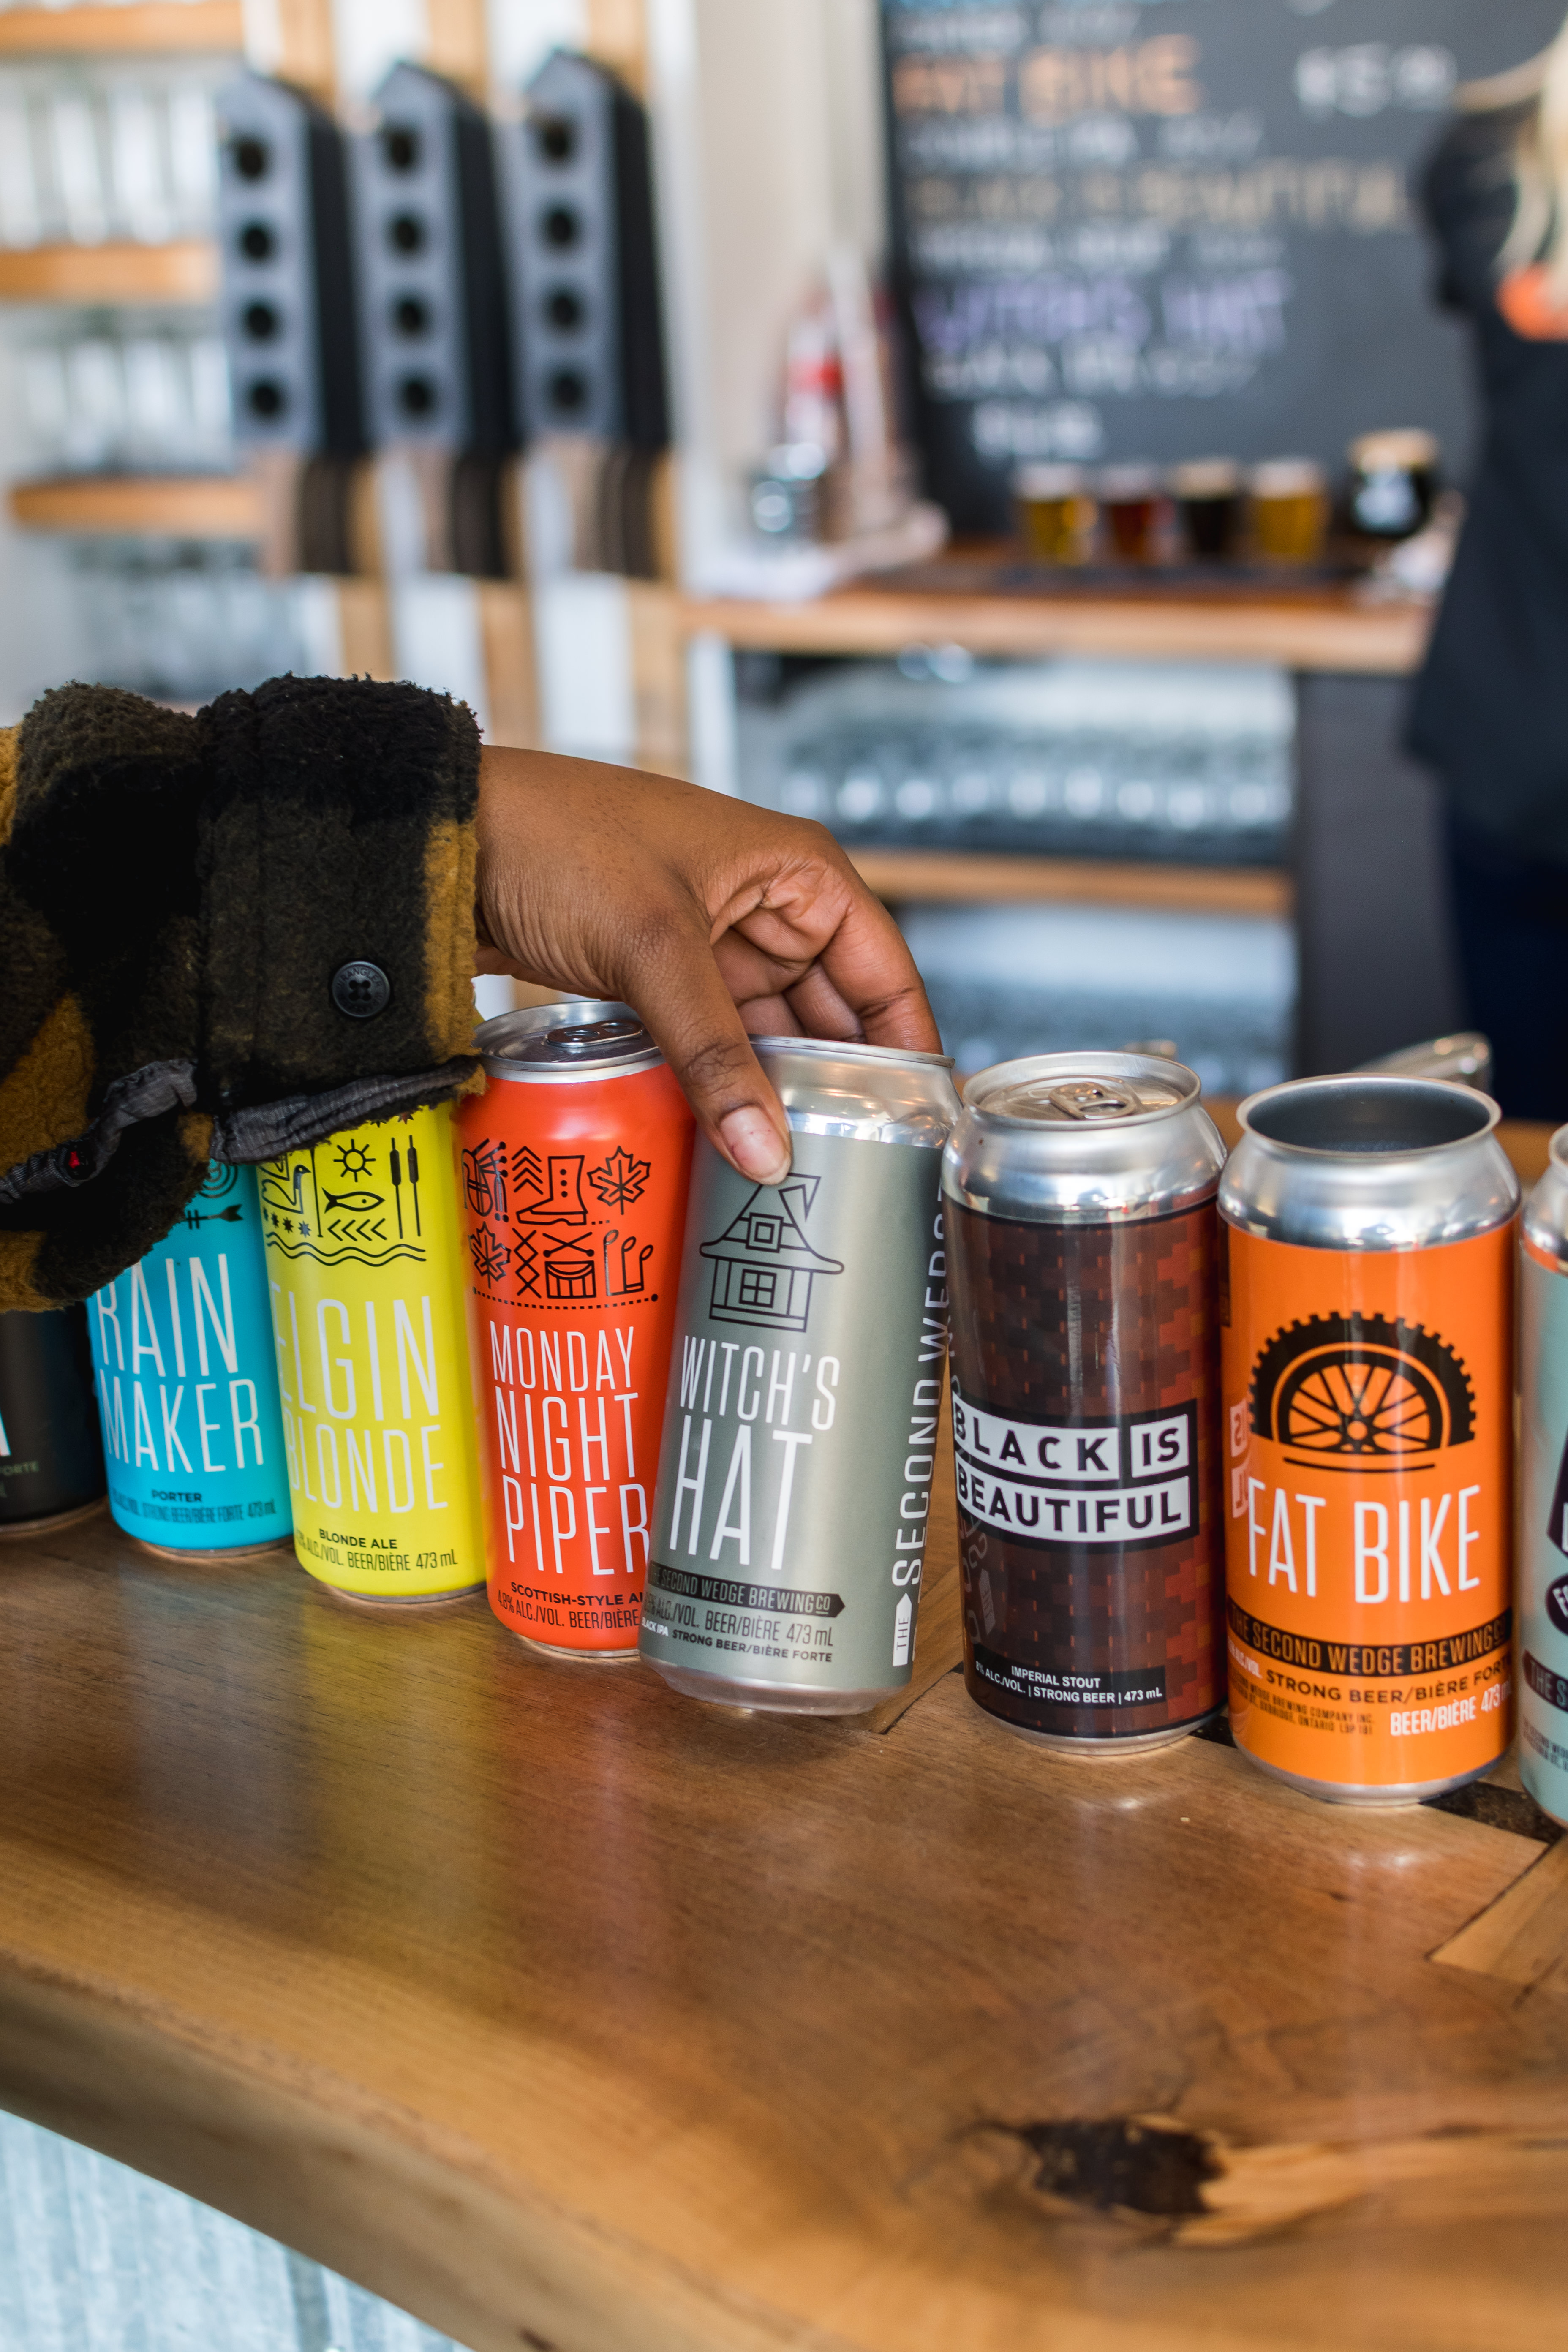 Image includes an arm picking up a grey can of Witch's Brew beer made by the Second Wedge Brewing Company. The can is sitting on a bar counter next to a blue can of Elgin Blonde, a yellow can of Rain Maker, an orange can of Monday Night Piper, a black can of Black is Beautiful and an orange can of Fat Tire. All of these are beers made by the Second Wedge Brewing Company.